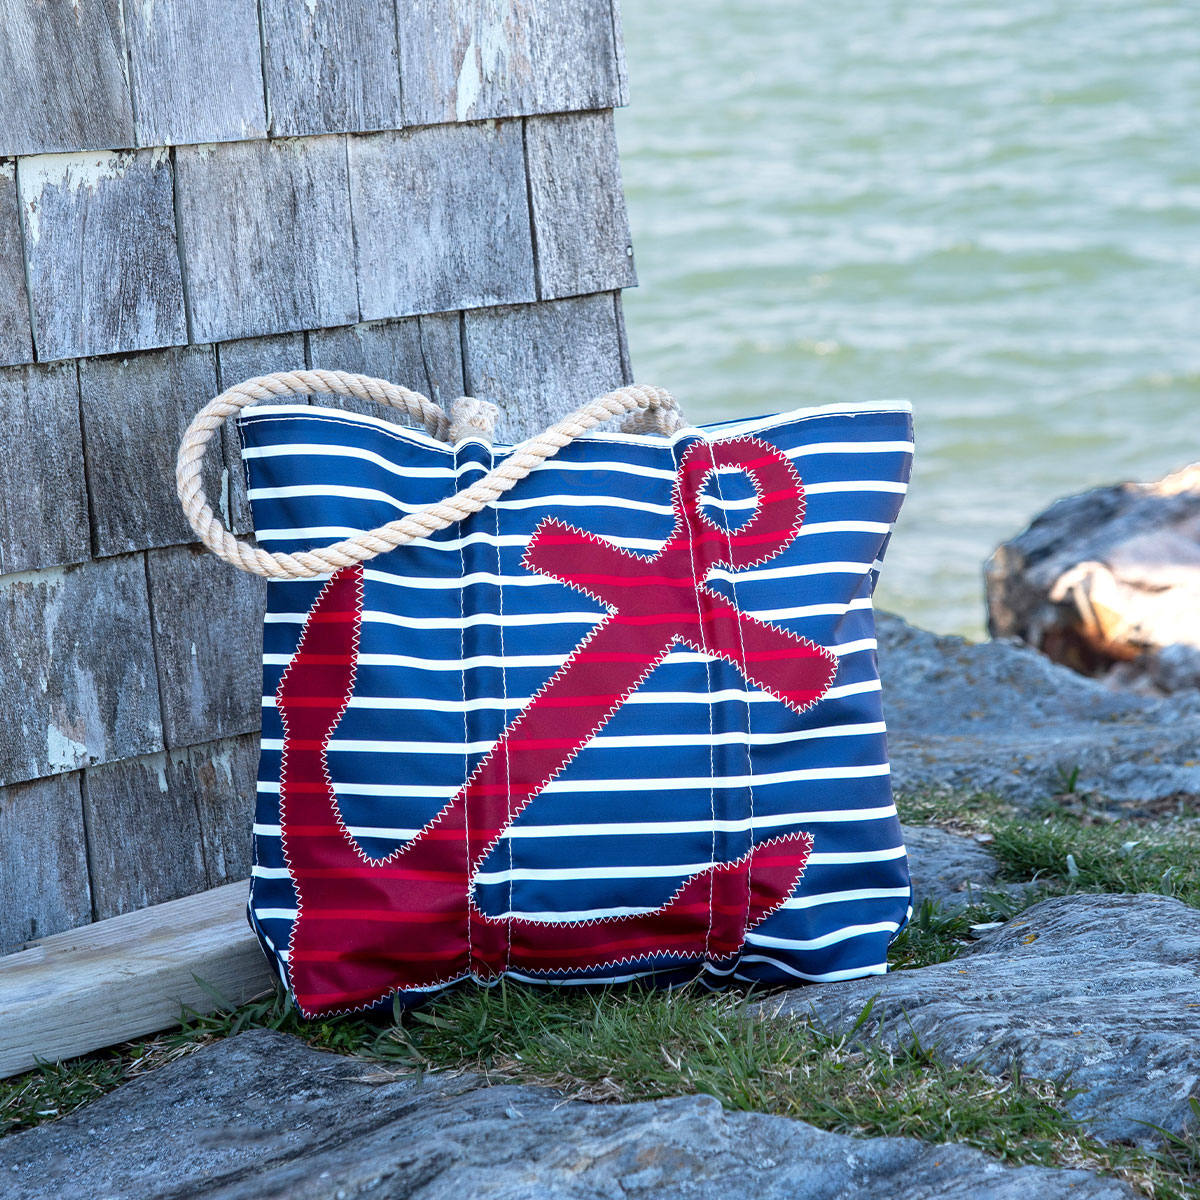 Red Anchor on Navy Stripes Tote